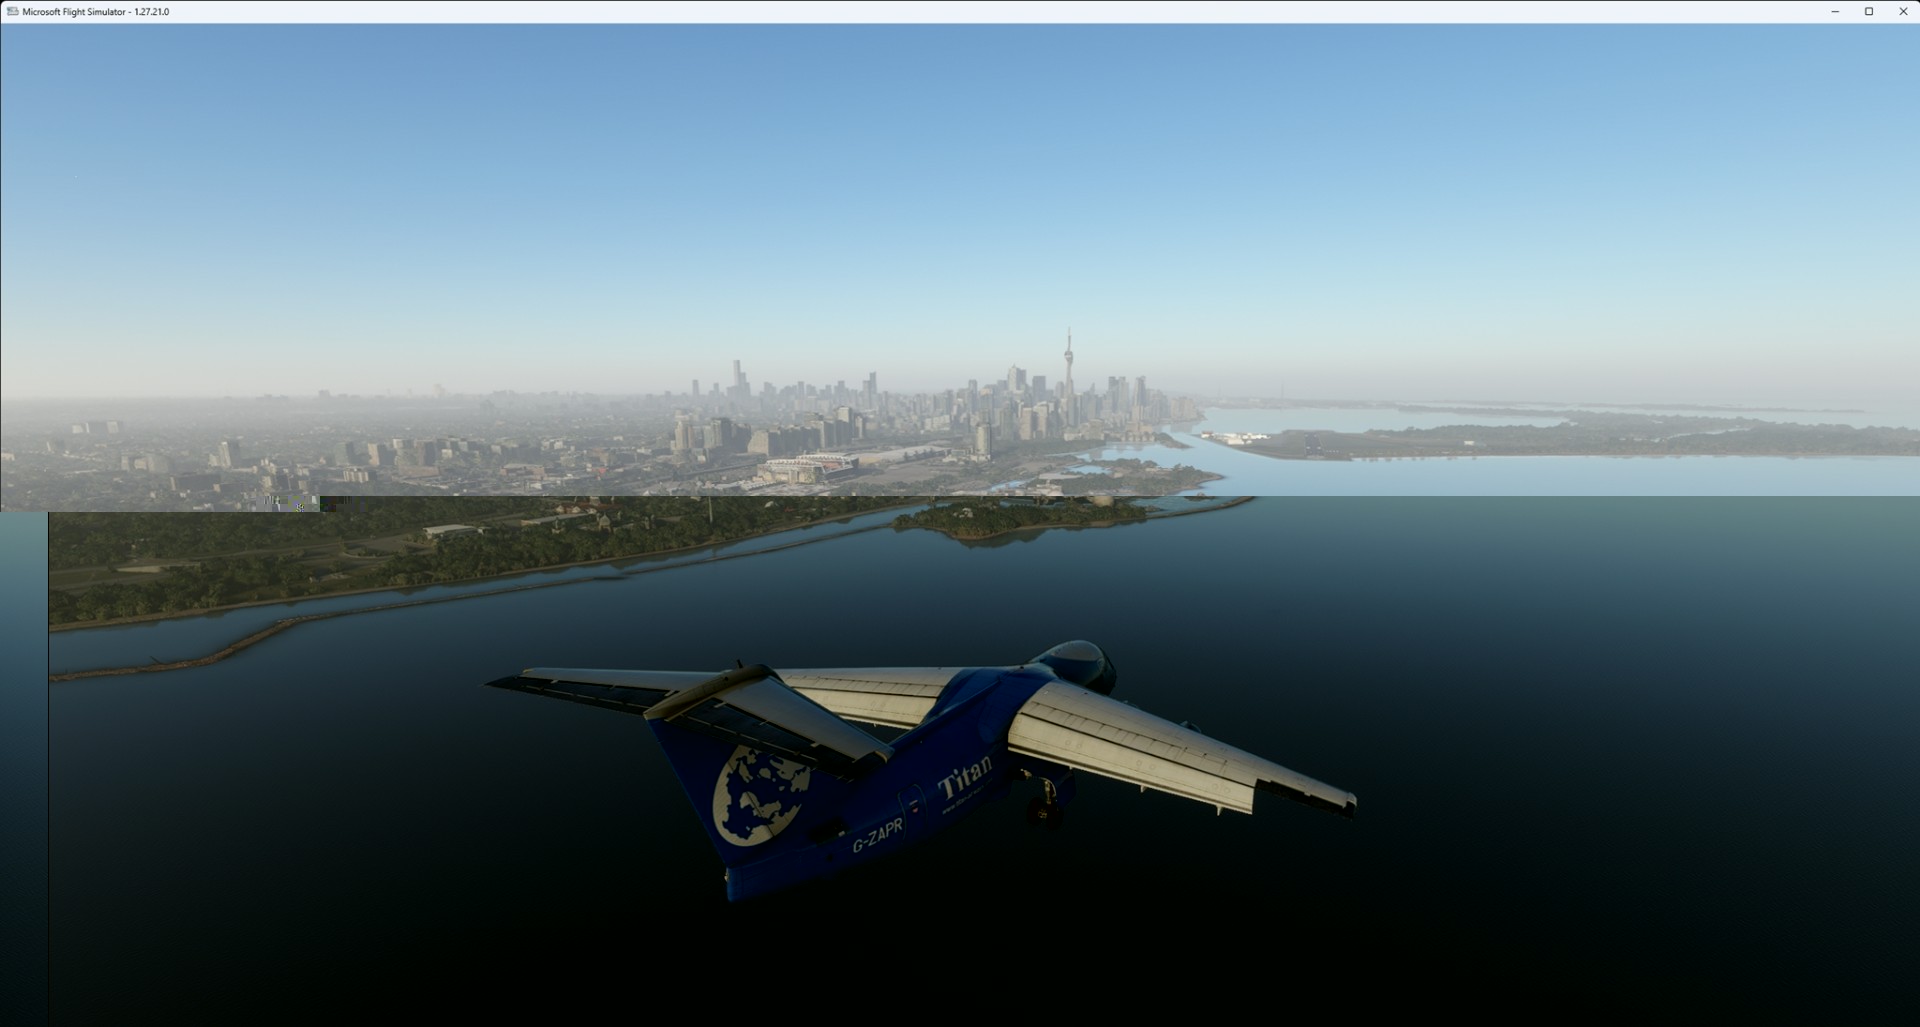 Finals with Toronto to the left. Not convinced by the photogrammetry cities.